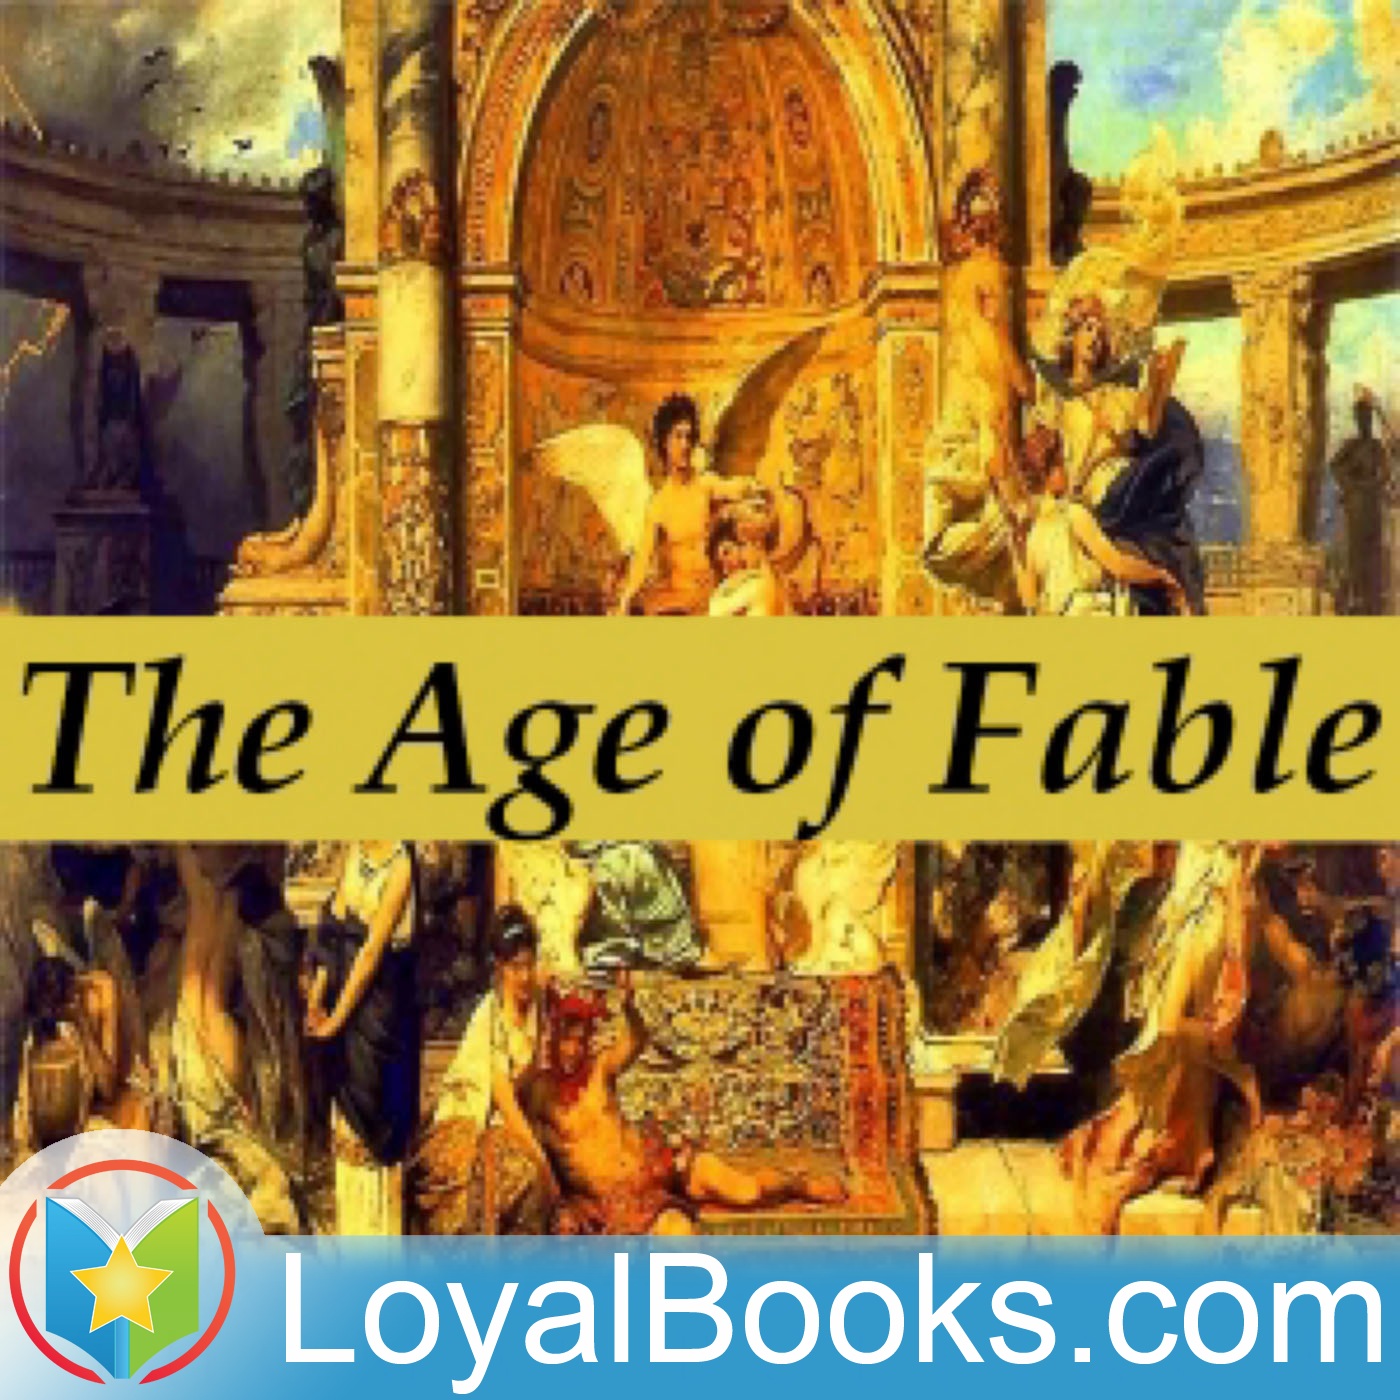 The Age of Fable: Chapter 10